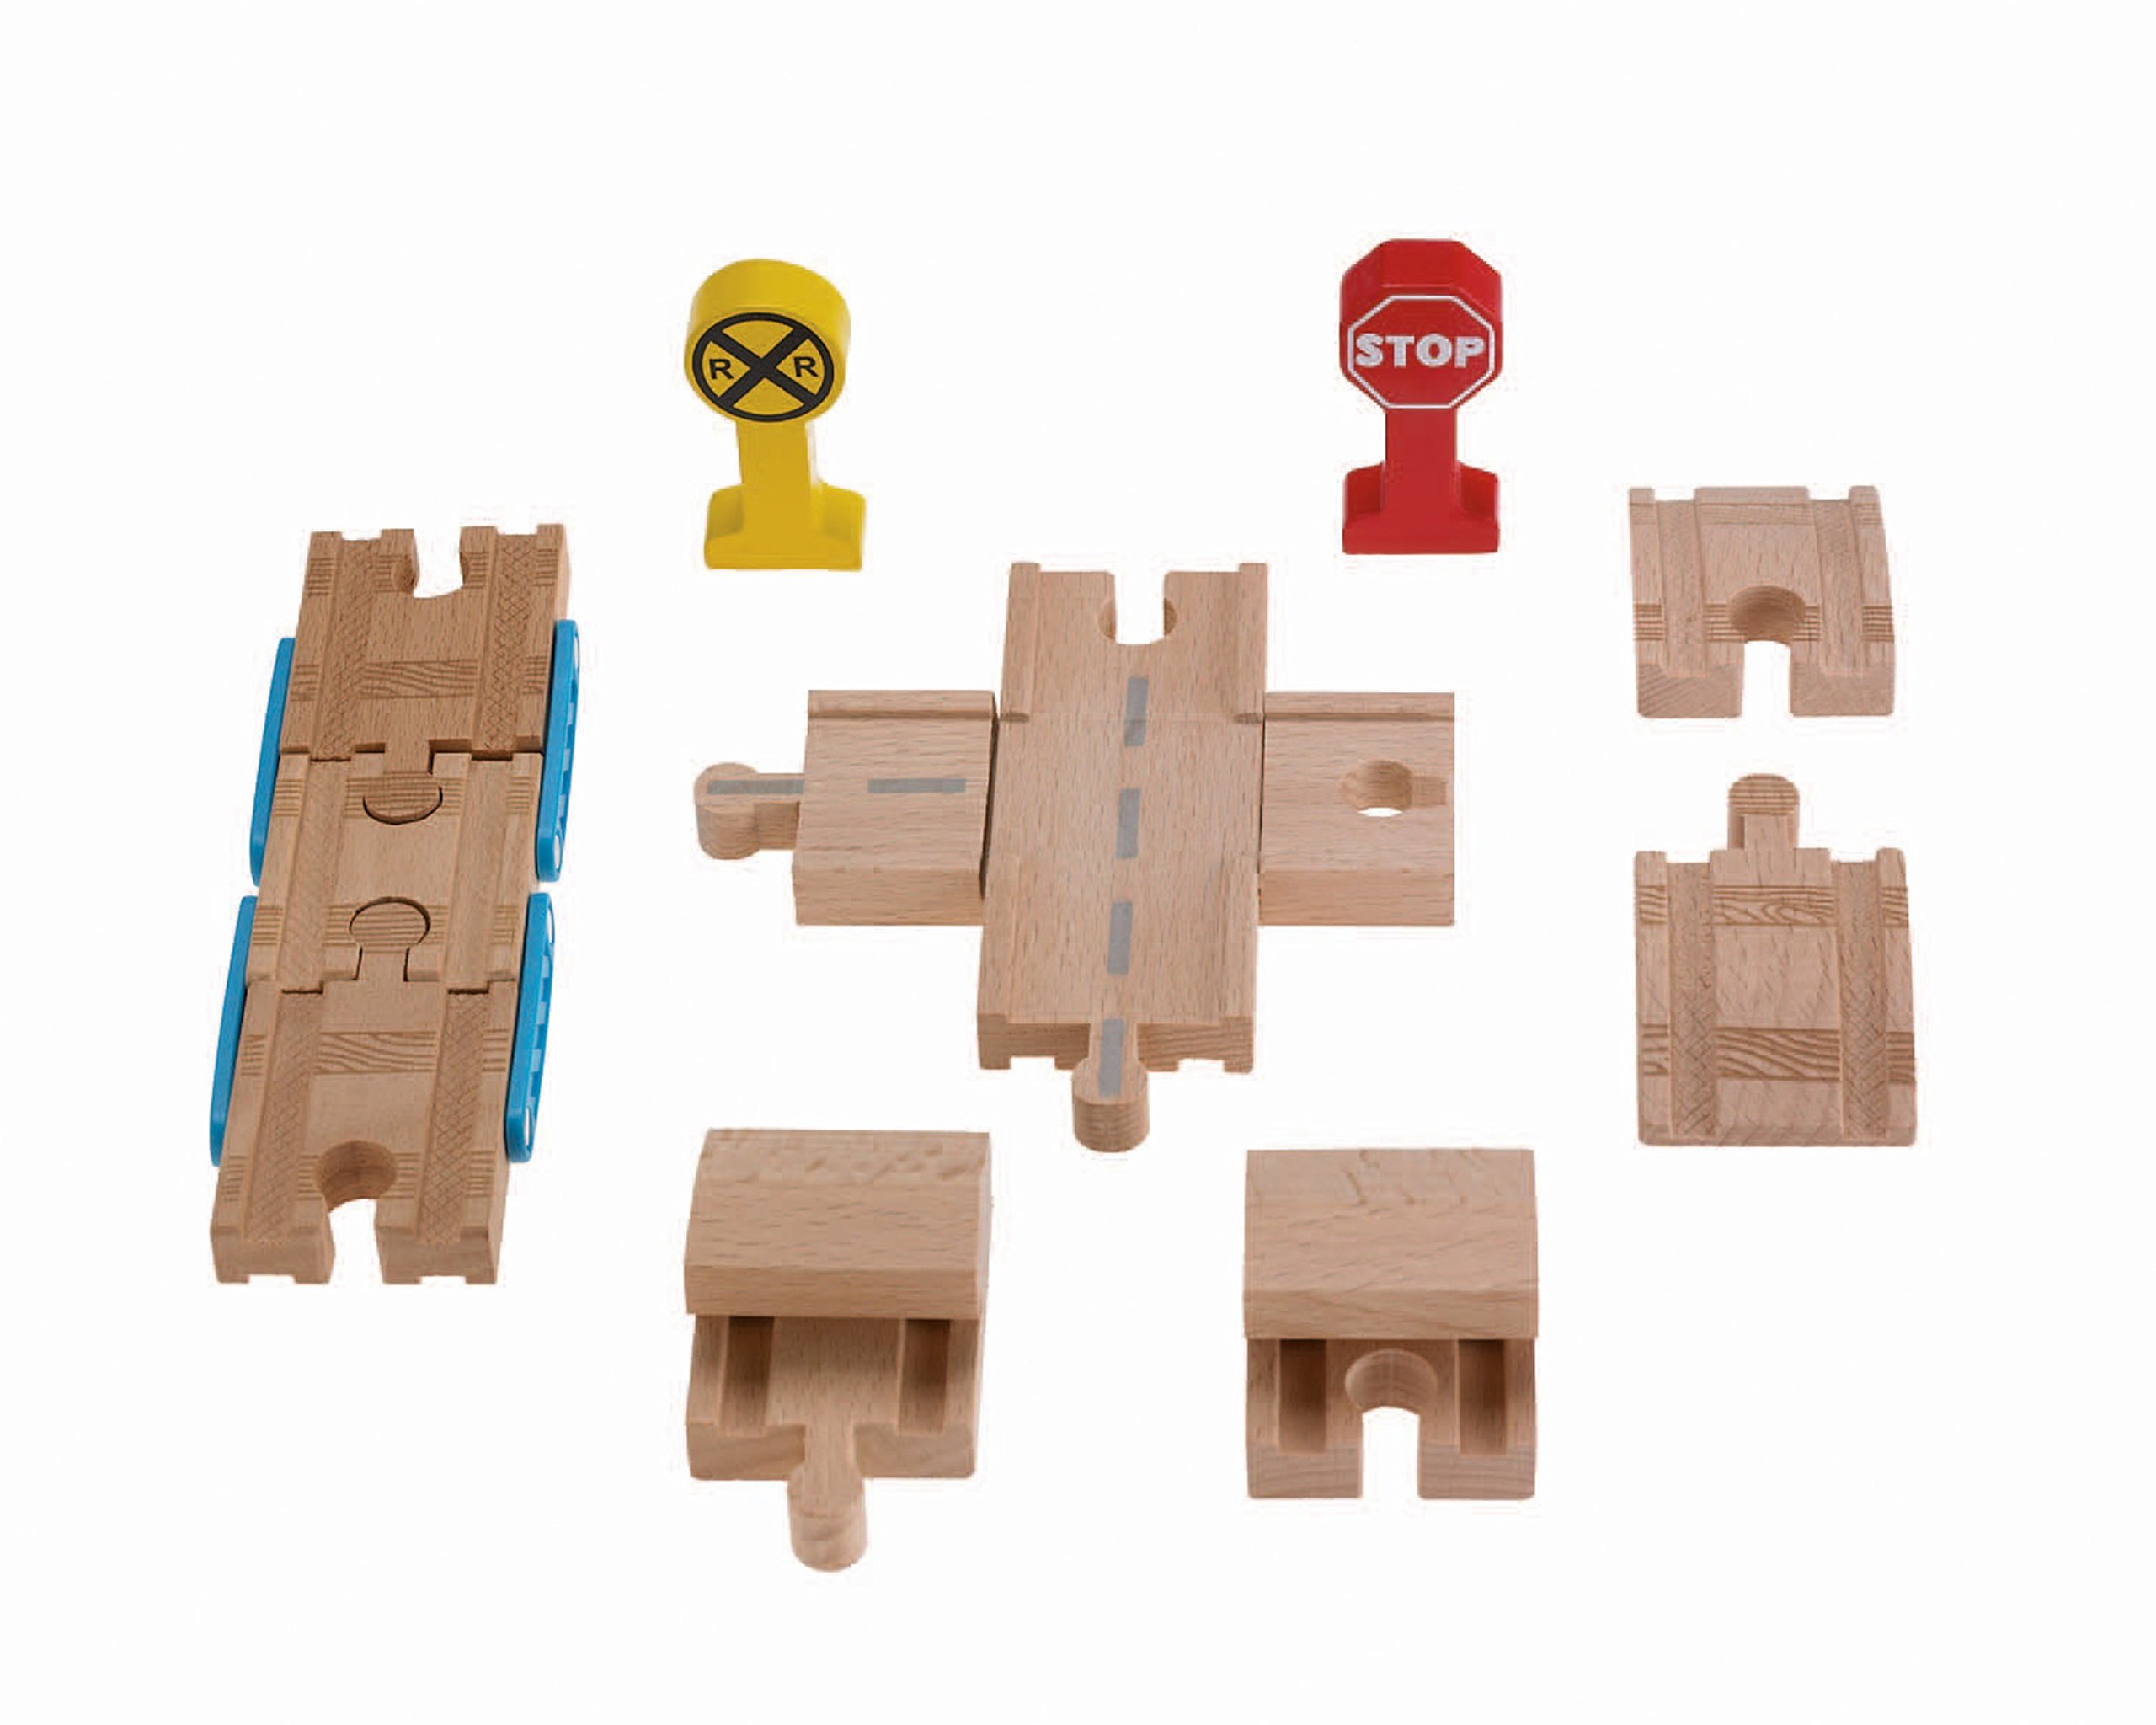 Thomas & Friends Wooden Railway, Deluxe Track Accessory Pack